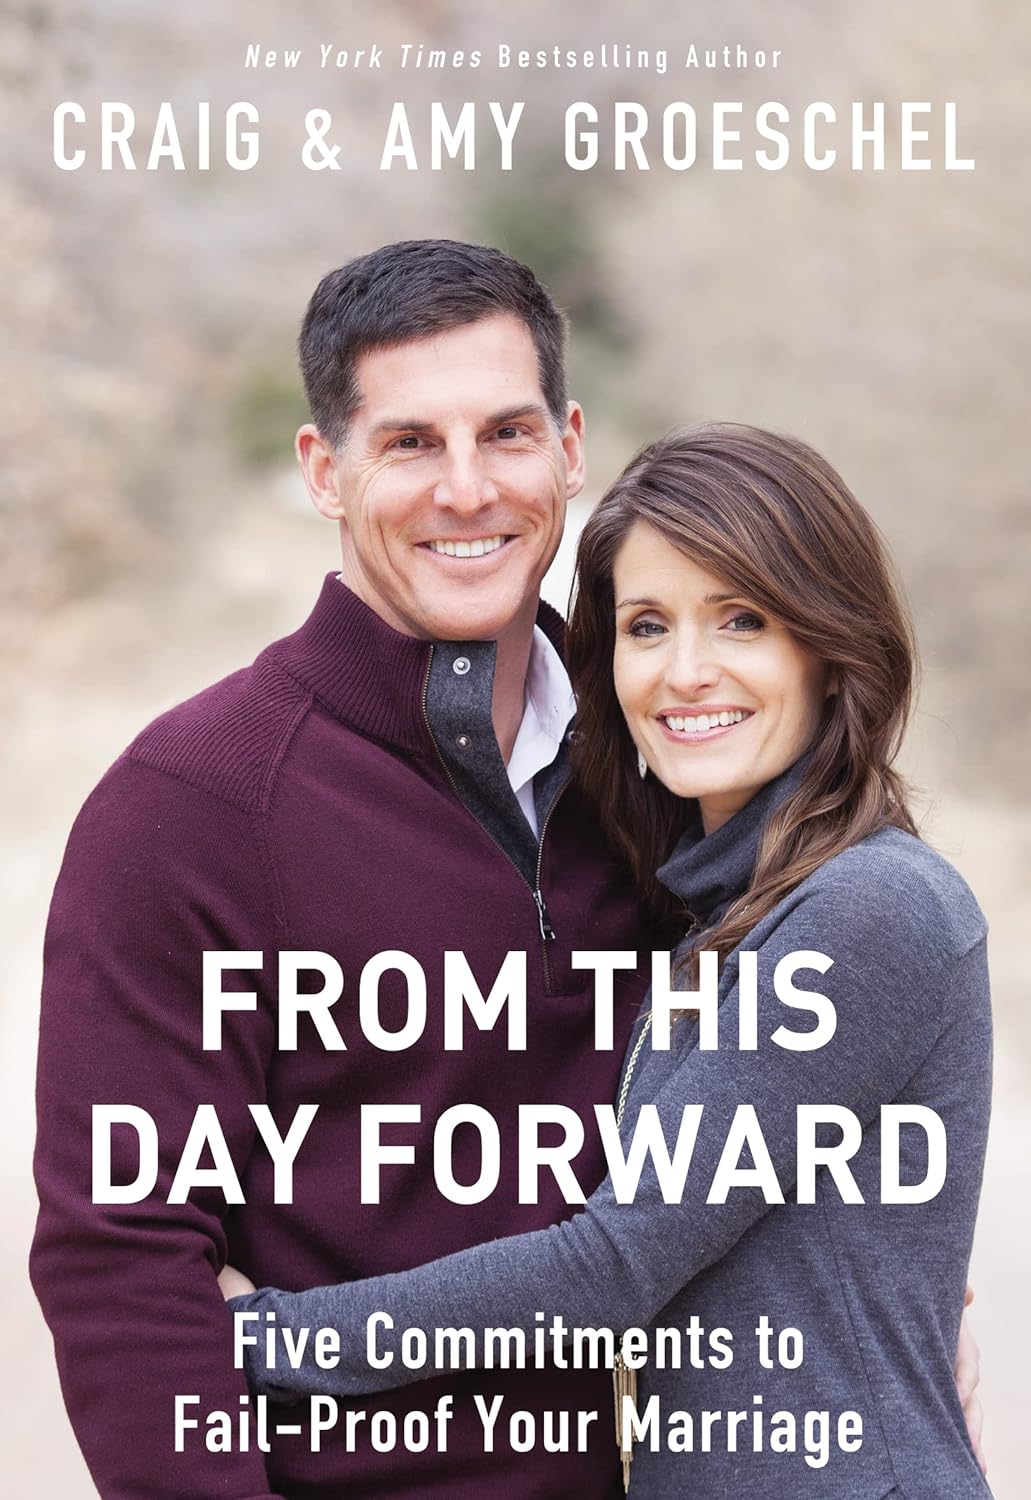 From This Day Forward: Five Commitments to Fail-Proof Your Marriage by Criag Groeschel